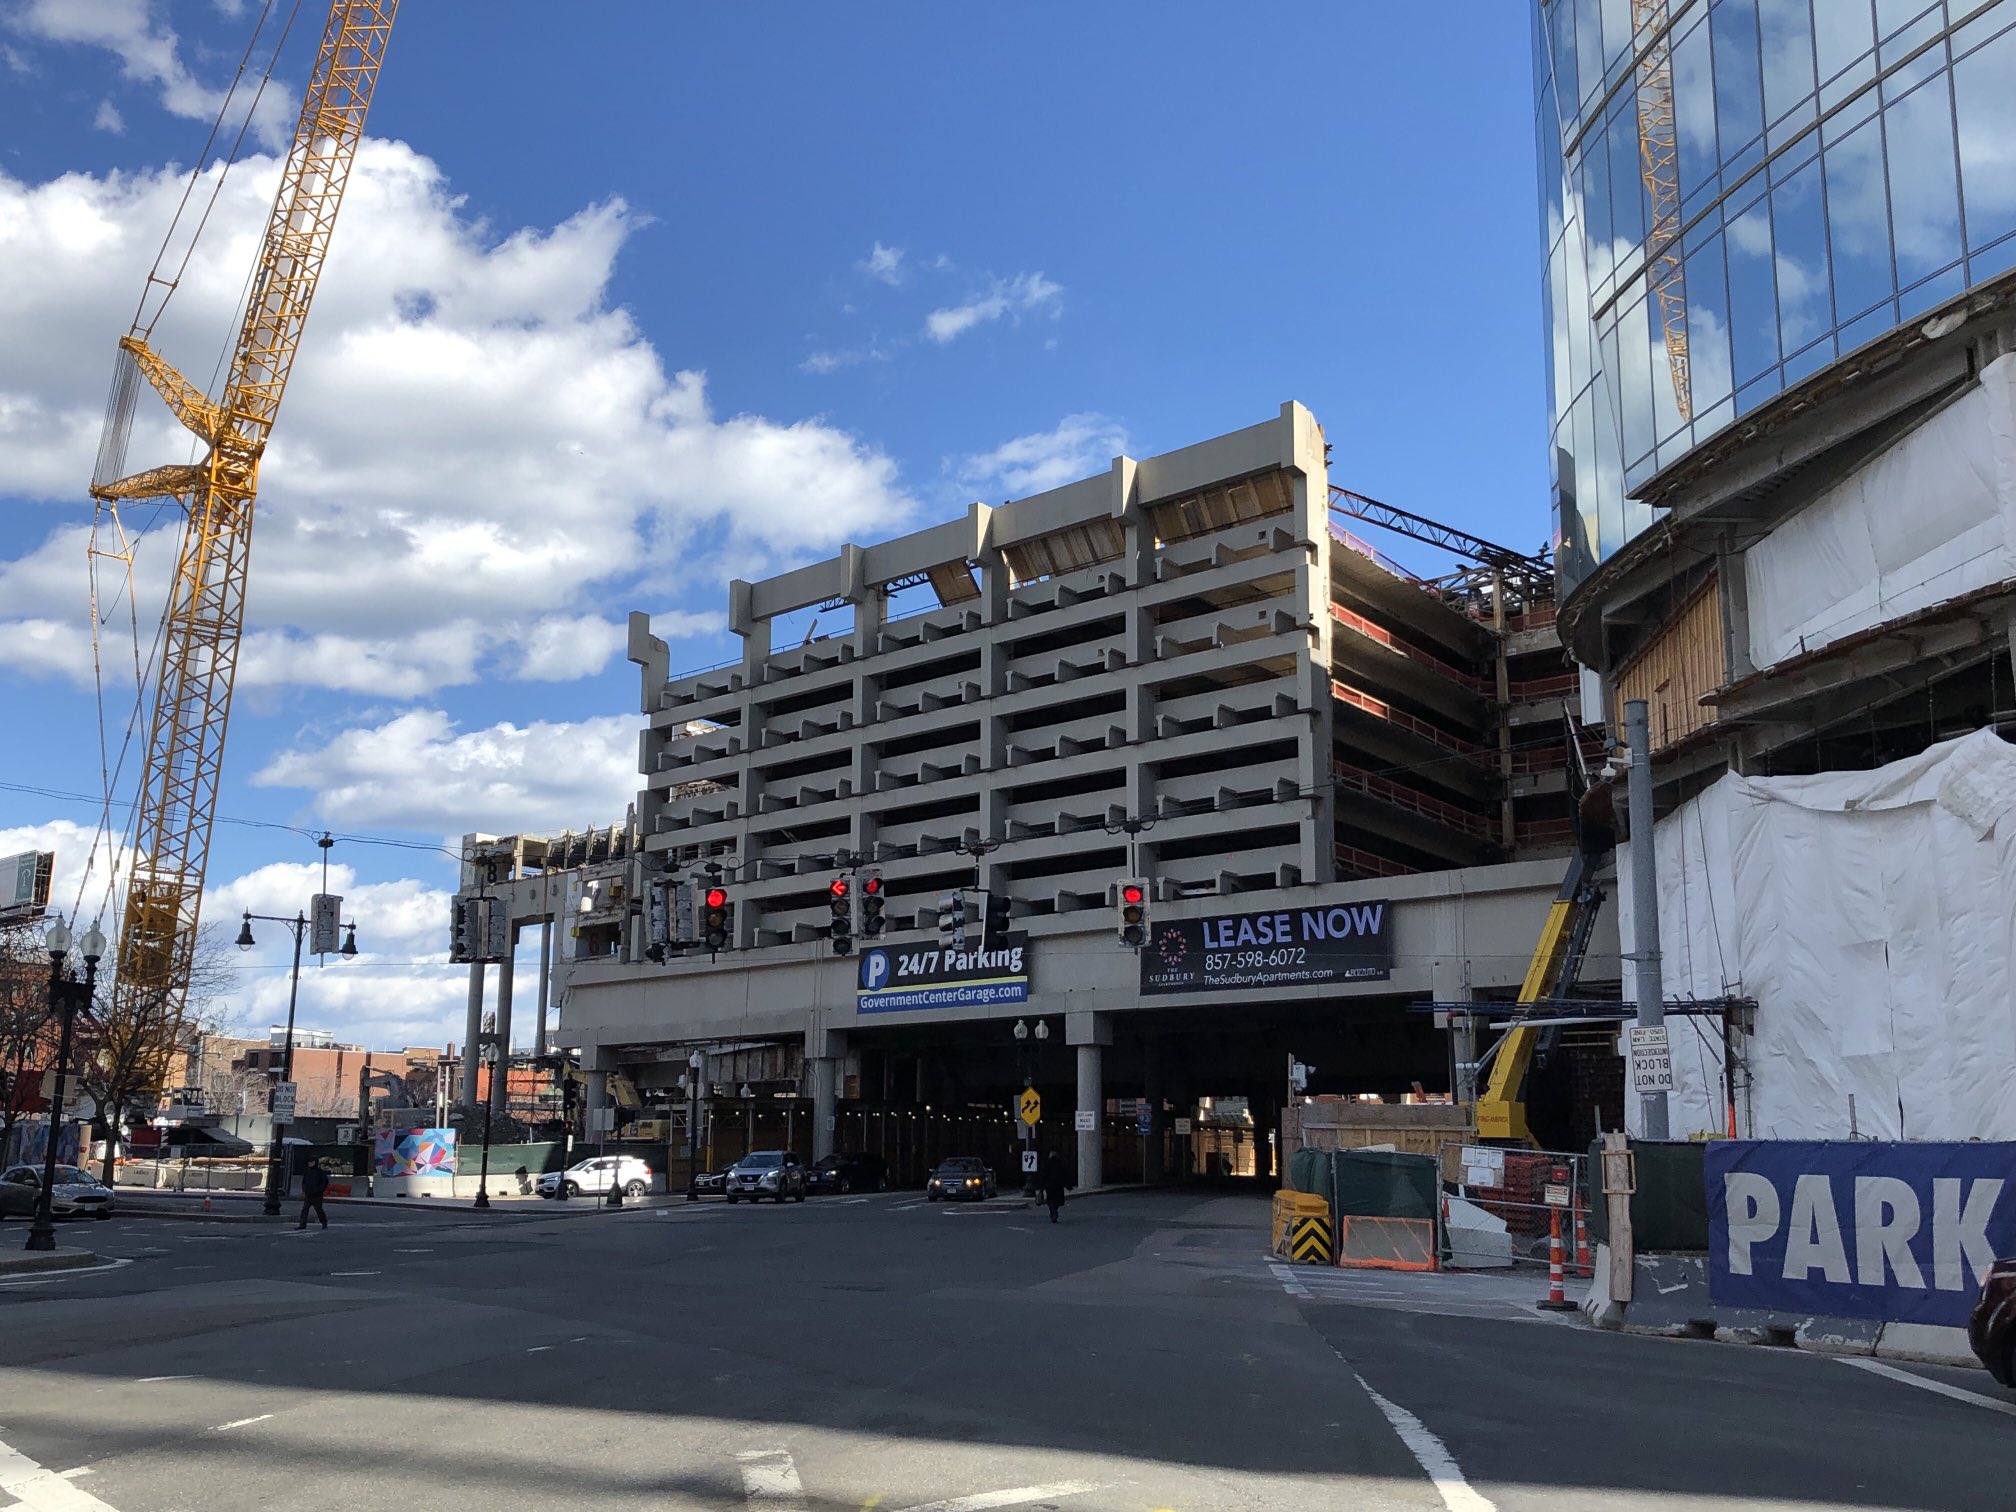 A large crane sits next to the Government Center parking garage in downtown Boston during its demolition. The left part of the garage is in the process of being taken apart, while the center portion that spans Merrimac Street (pictured in the foreground) is still intact